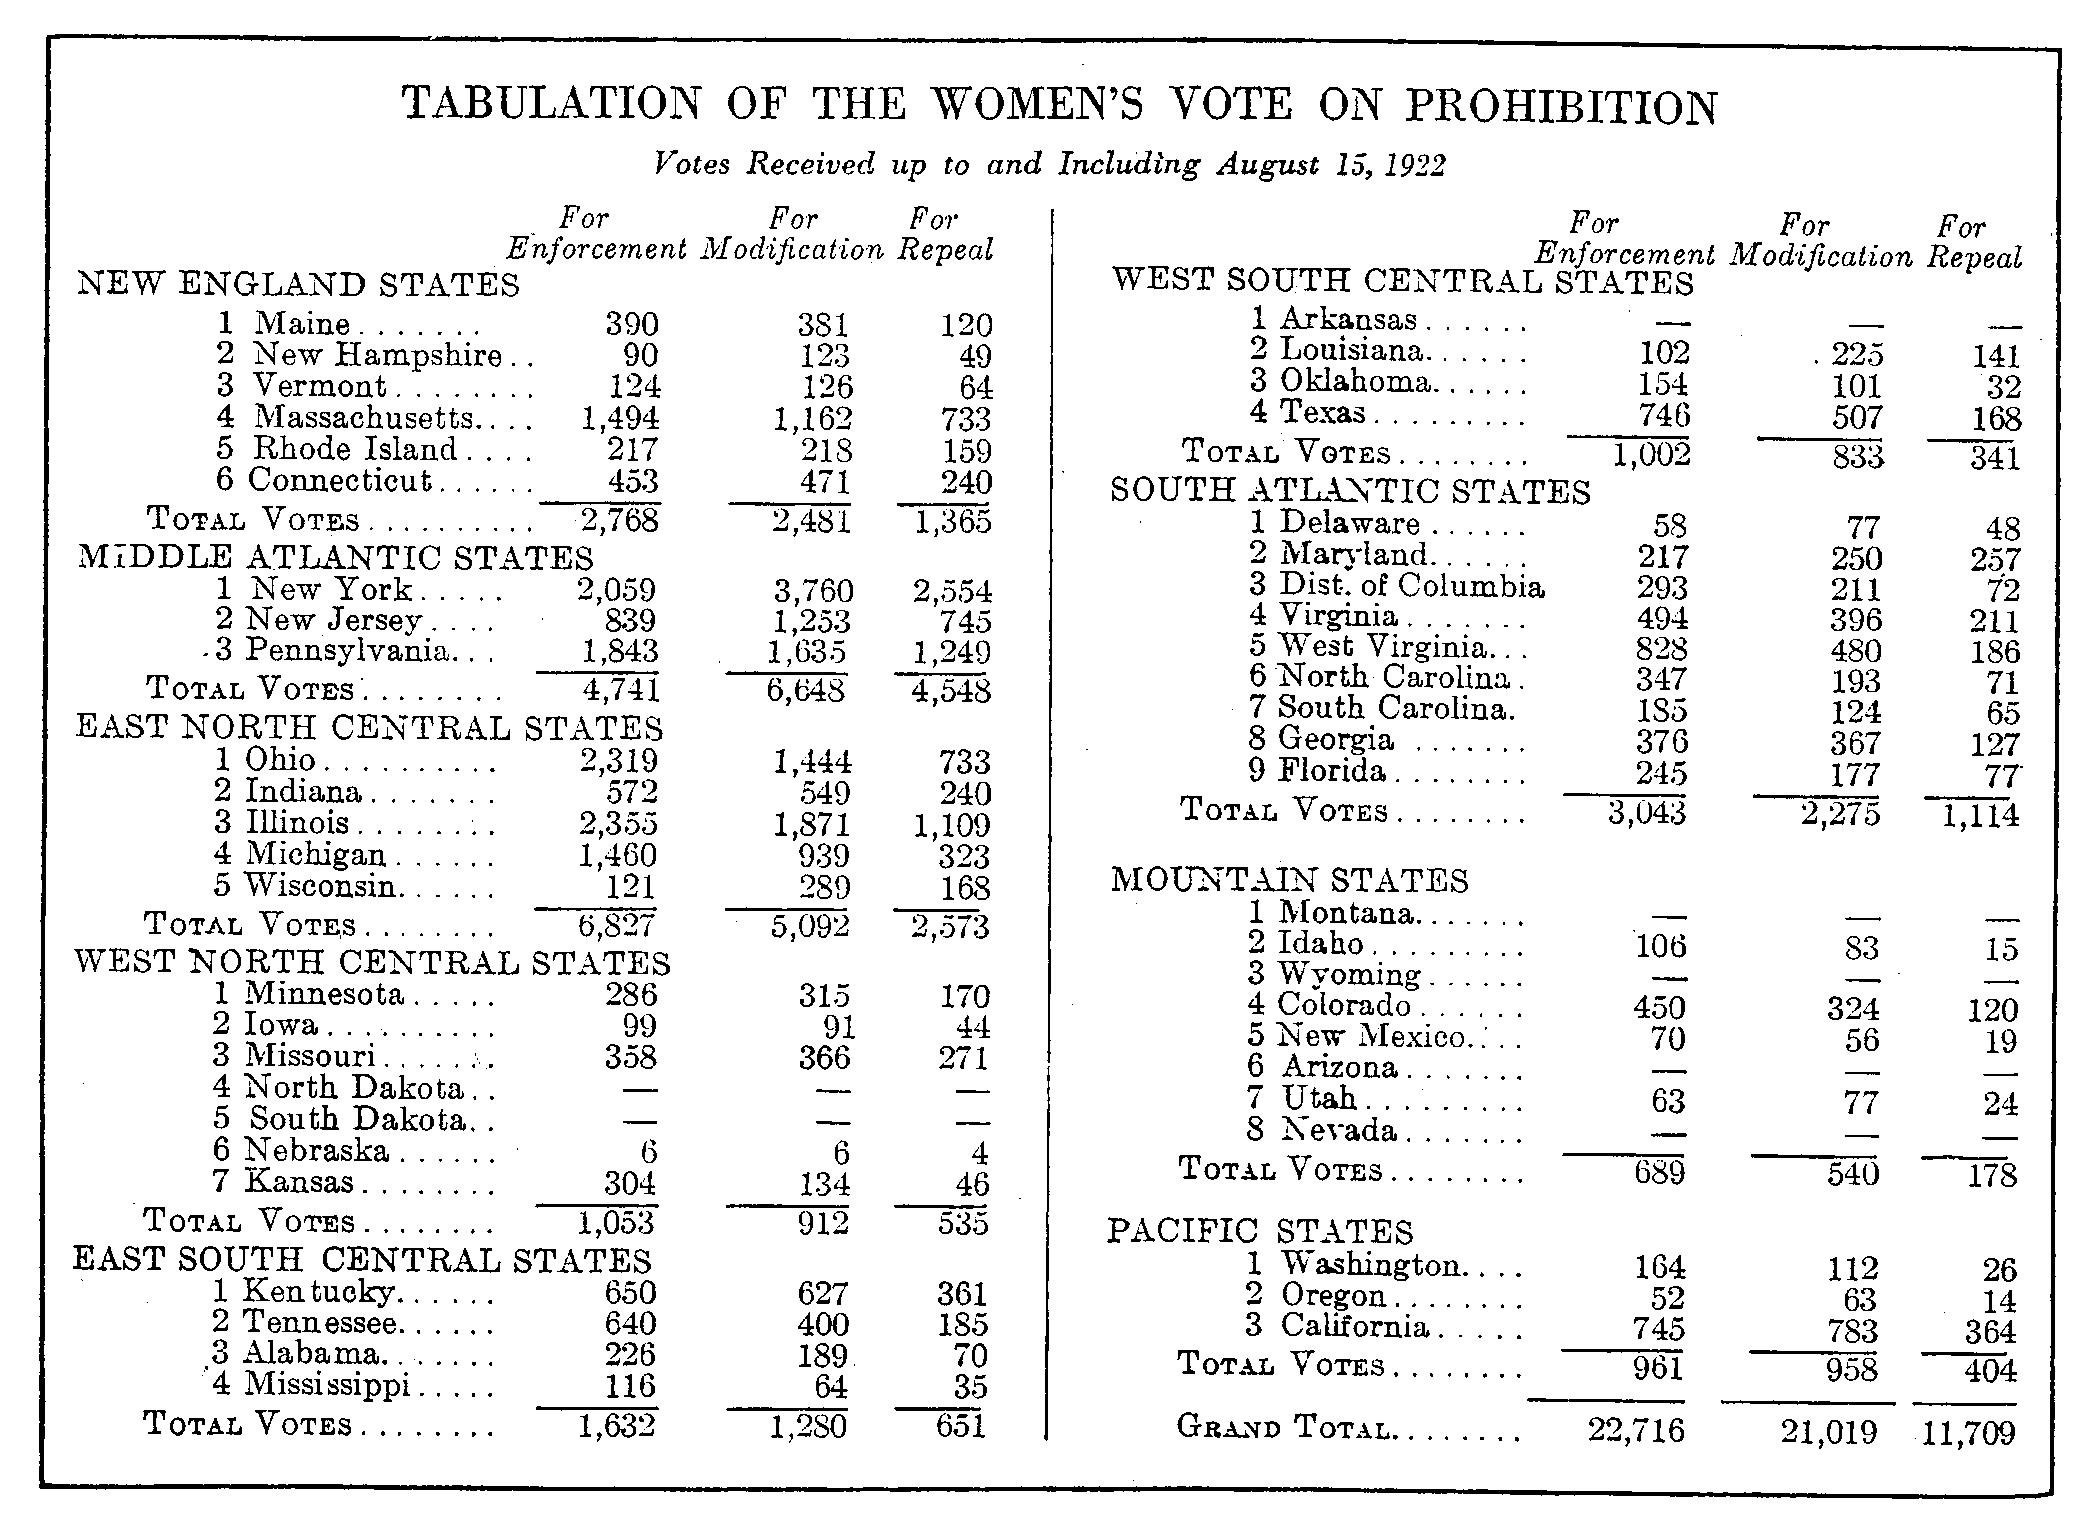 tabulation of women's vote by state